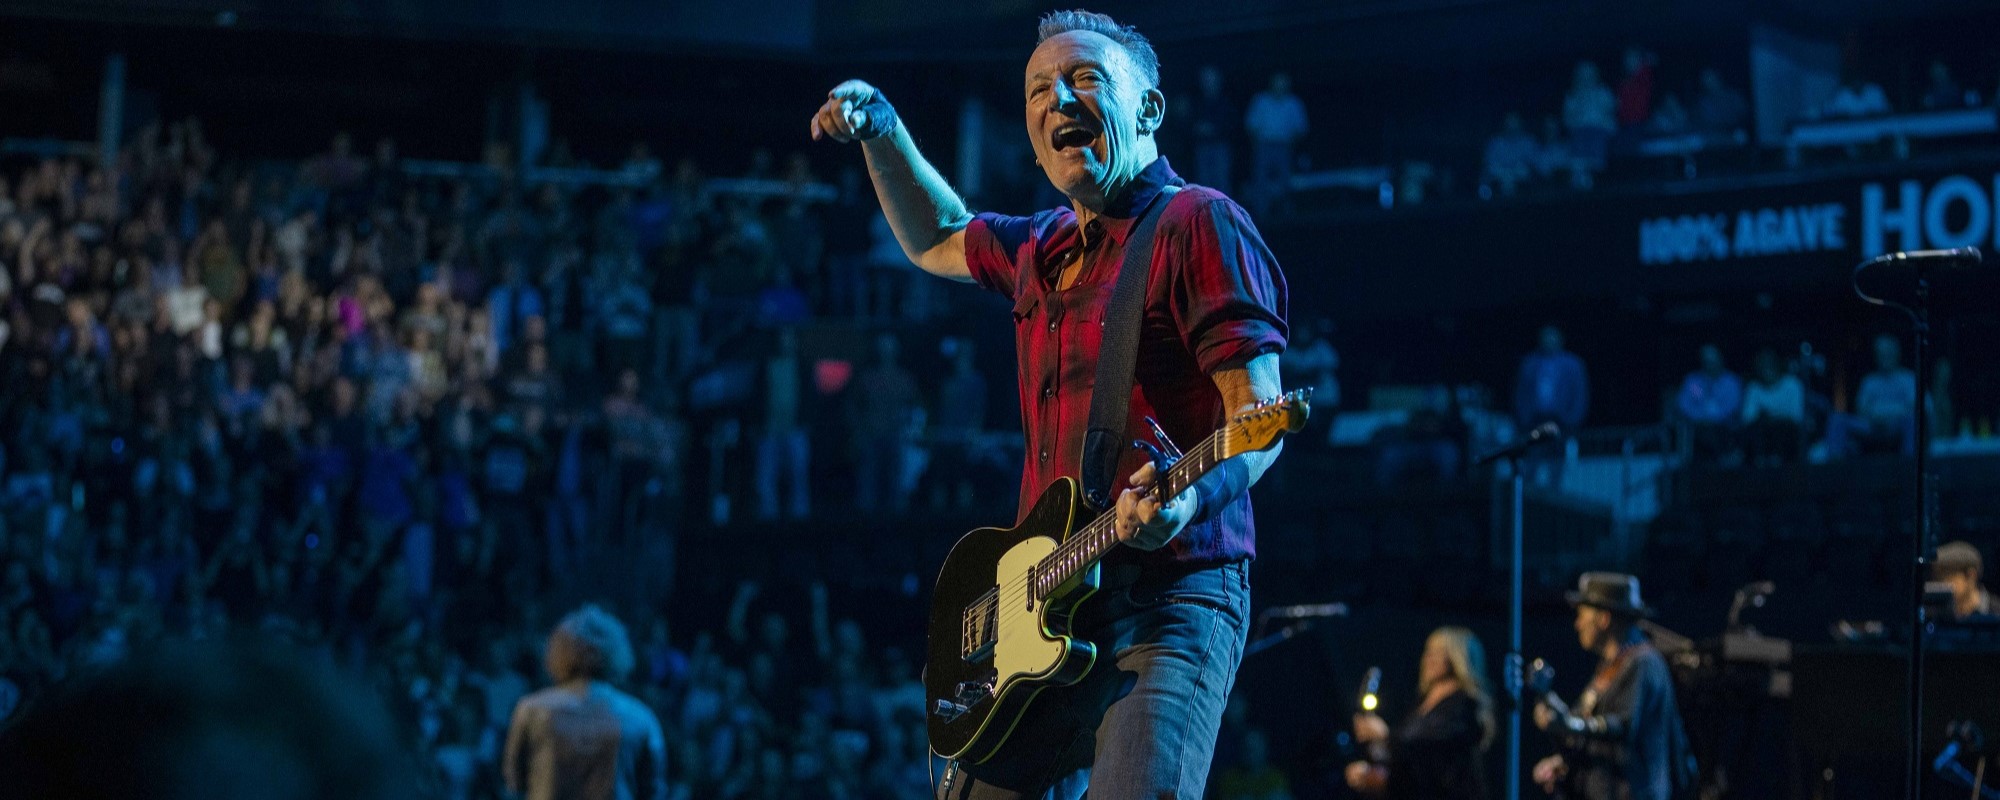 Watch Bruce Springsteen Channel Elvis Presley During Las Vegas Performance; E Street Band Takes Over San Francisco